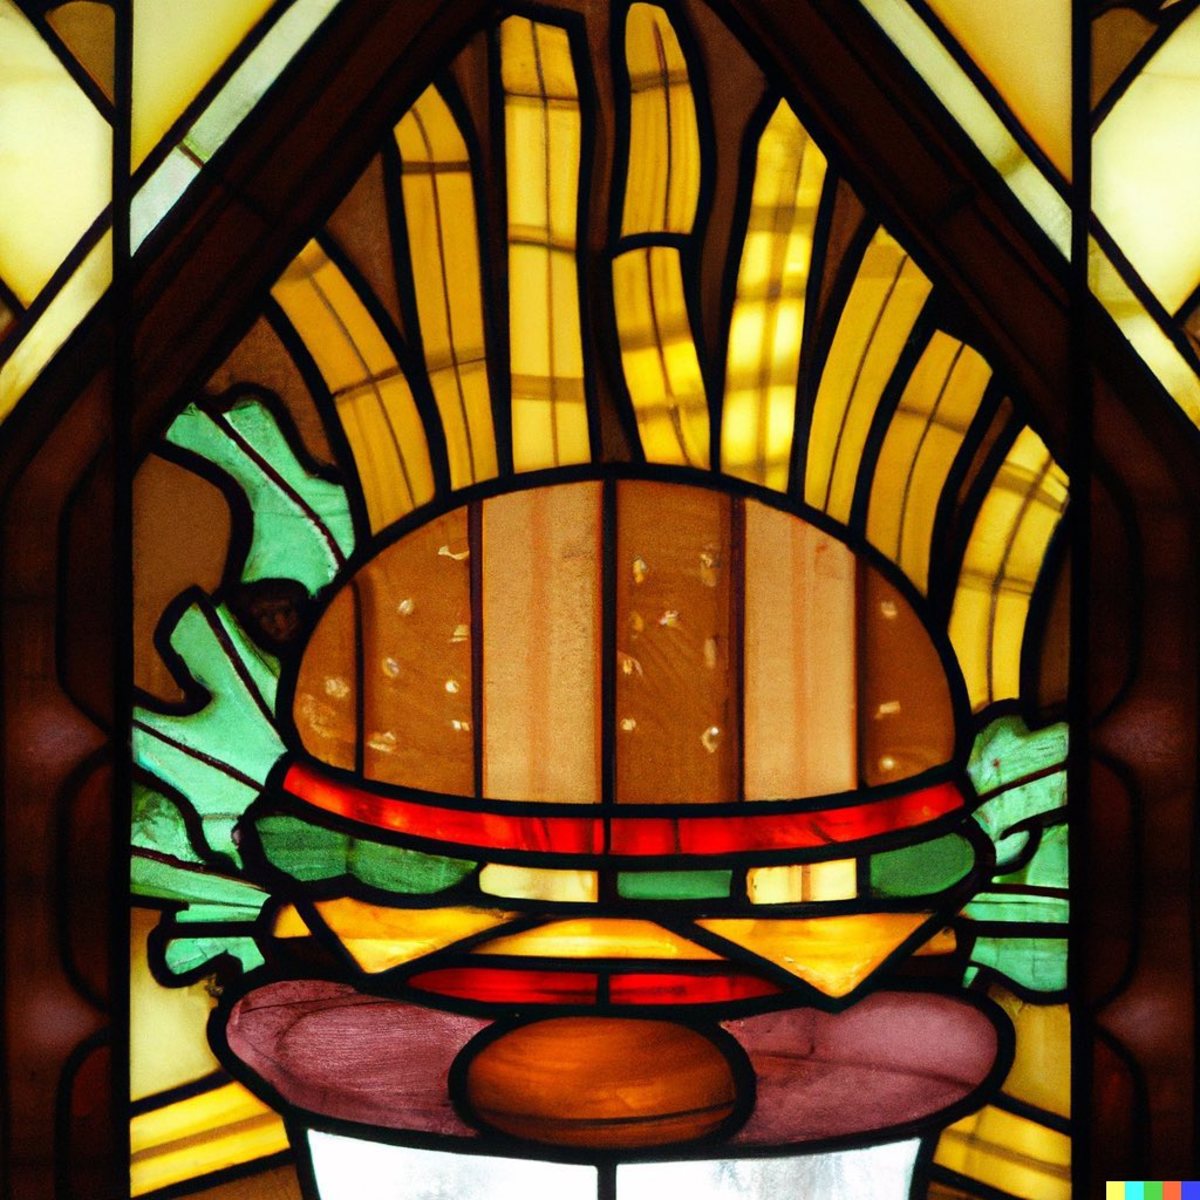 A stained glass window depicting a hamburger and French fries (Actual text prompt used)